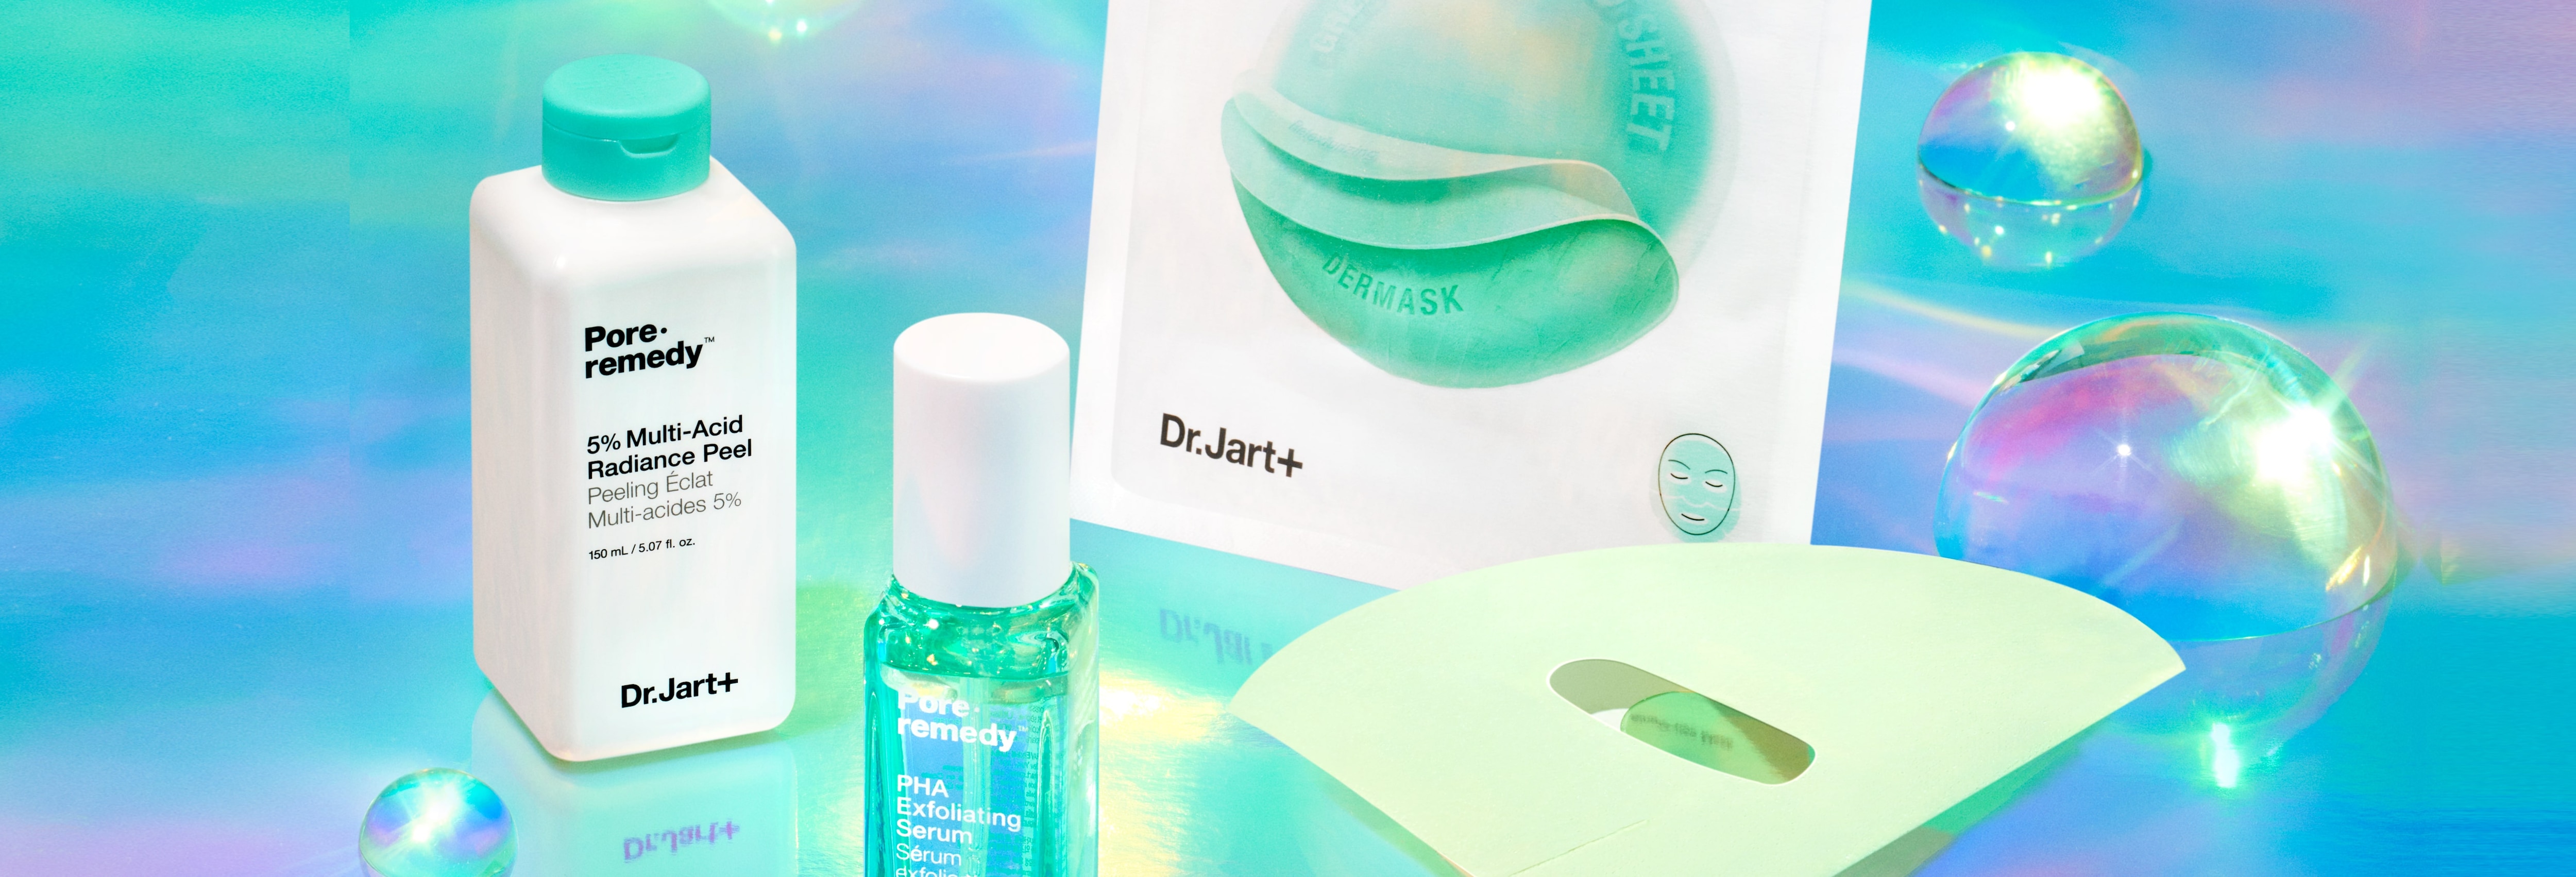 Dr.Jart+'s collection of skincare exfoliators for dullness and unclogging pores are displayed on a blue reflective background